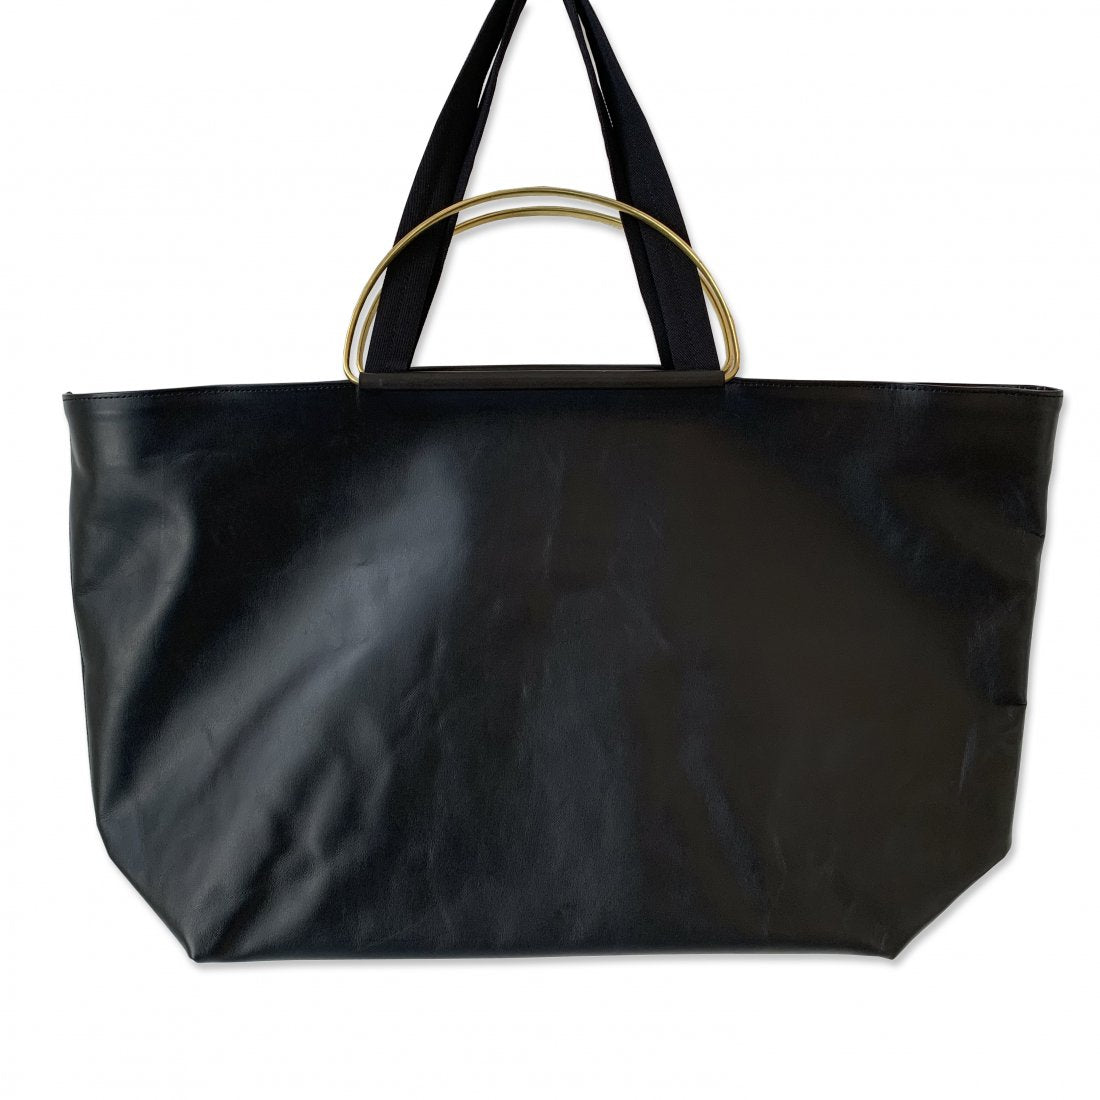 texnh/BRASS HANDLE TOTE(LEATHER)